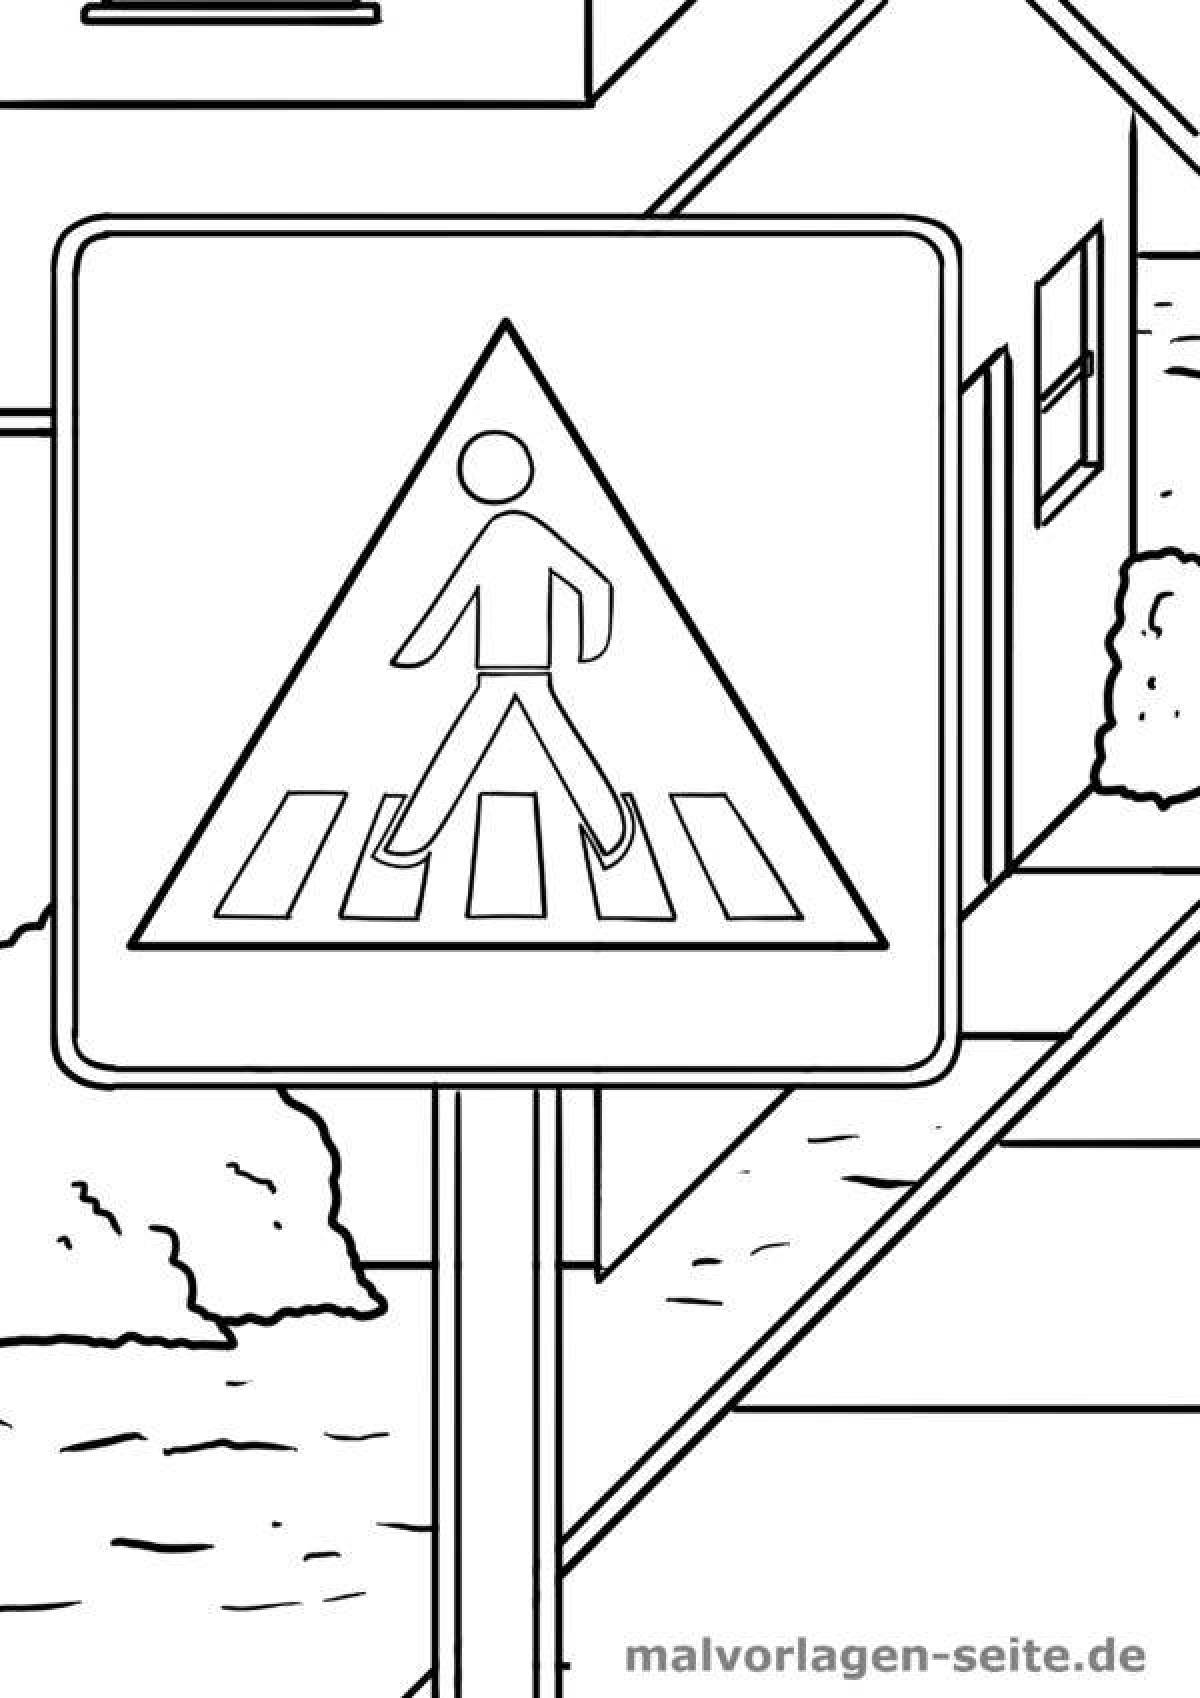 Coloring page busy pedestrian crossing traffic sign